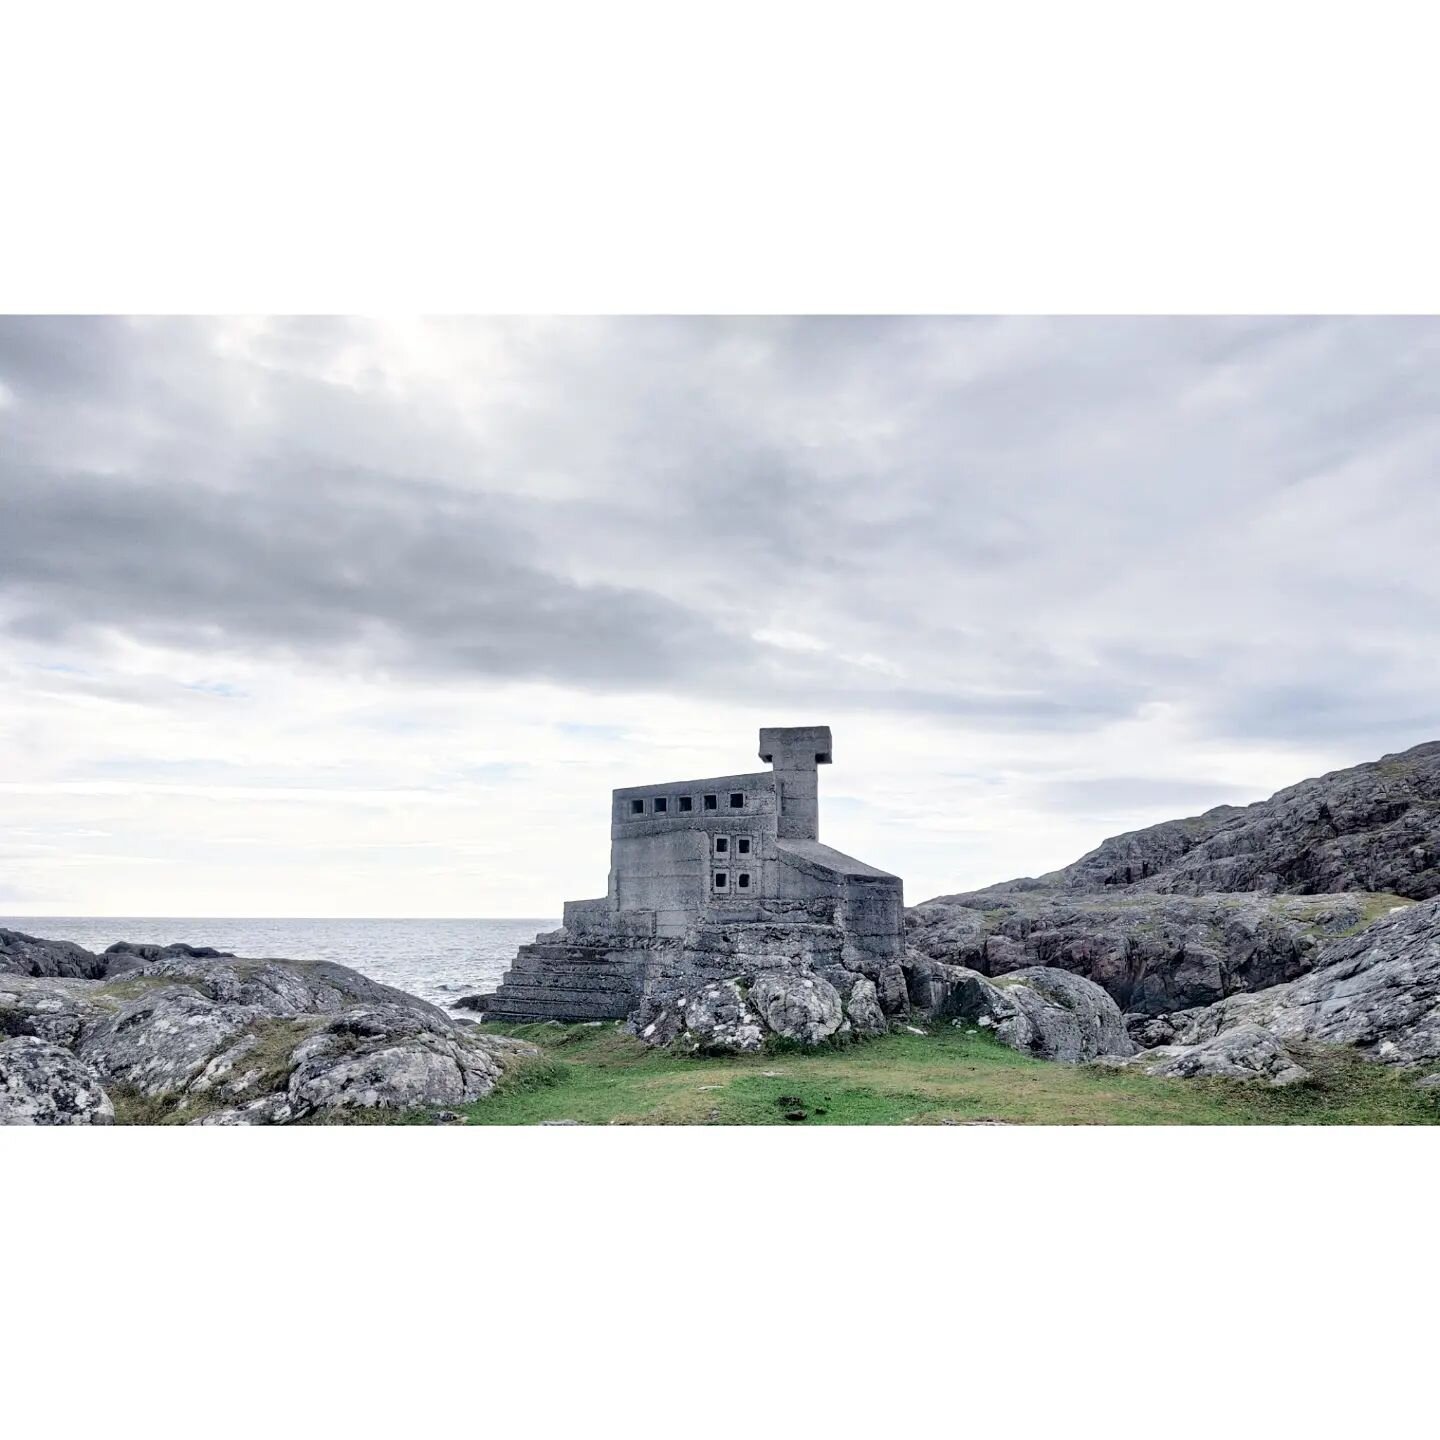 Hermit's Castle is a tiny cast concrete folly built as a bothy (quite mysteriously) in the 1950s by the architect David Scott. We were so pleased to find this yesterday on the rocks at the beautiful Achmelvich Bay (it is difficult to spot). Exploring